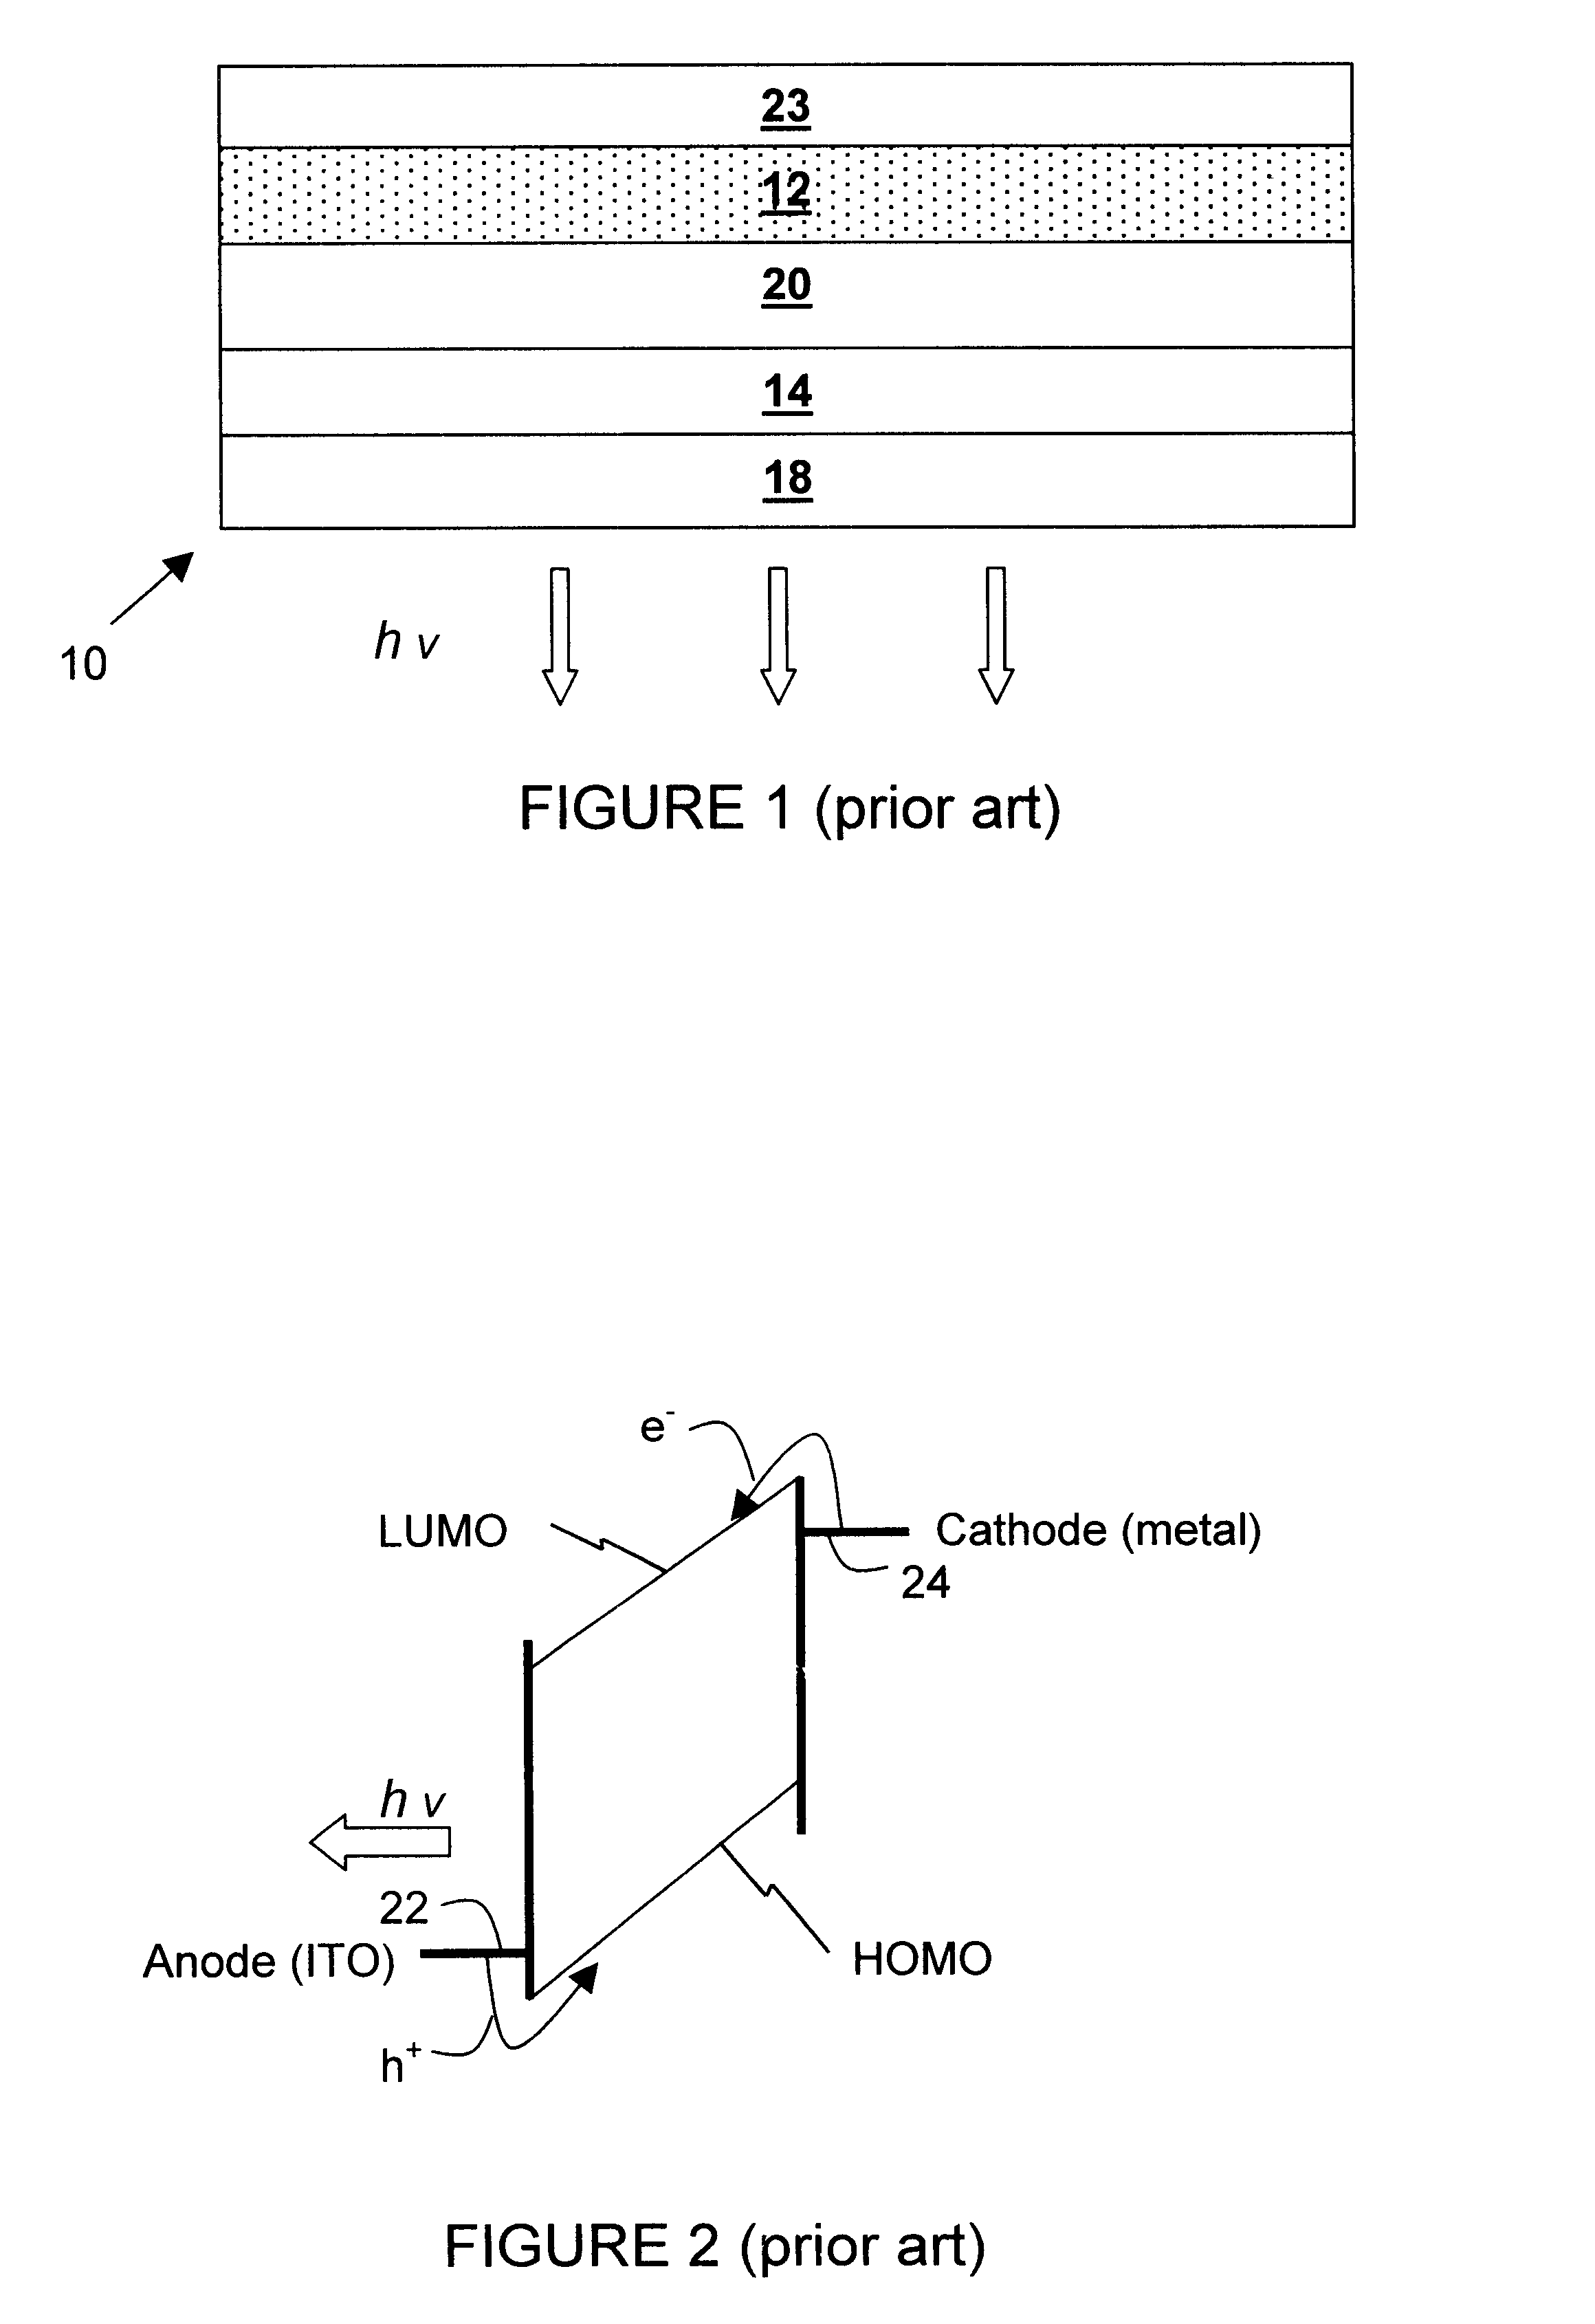 Electronic light emissive displays incorporating transparent and conductive zinc oxide thin film